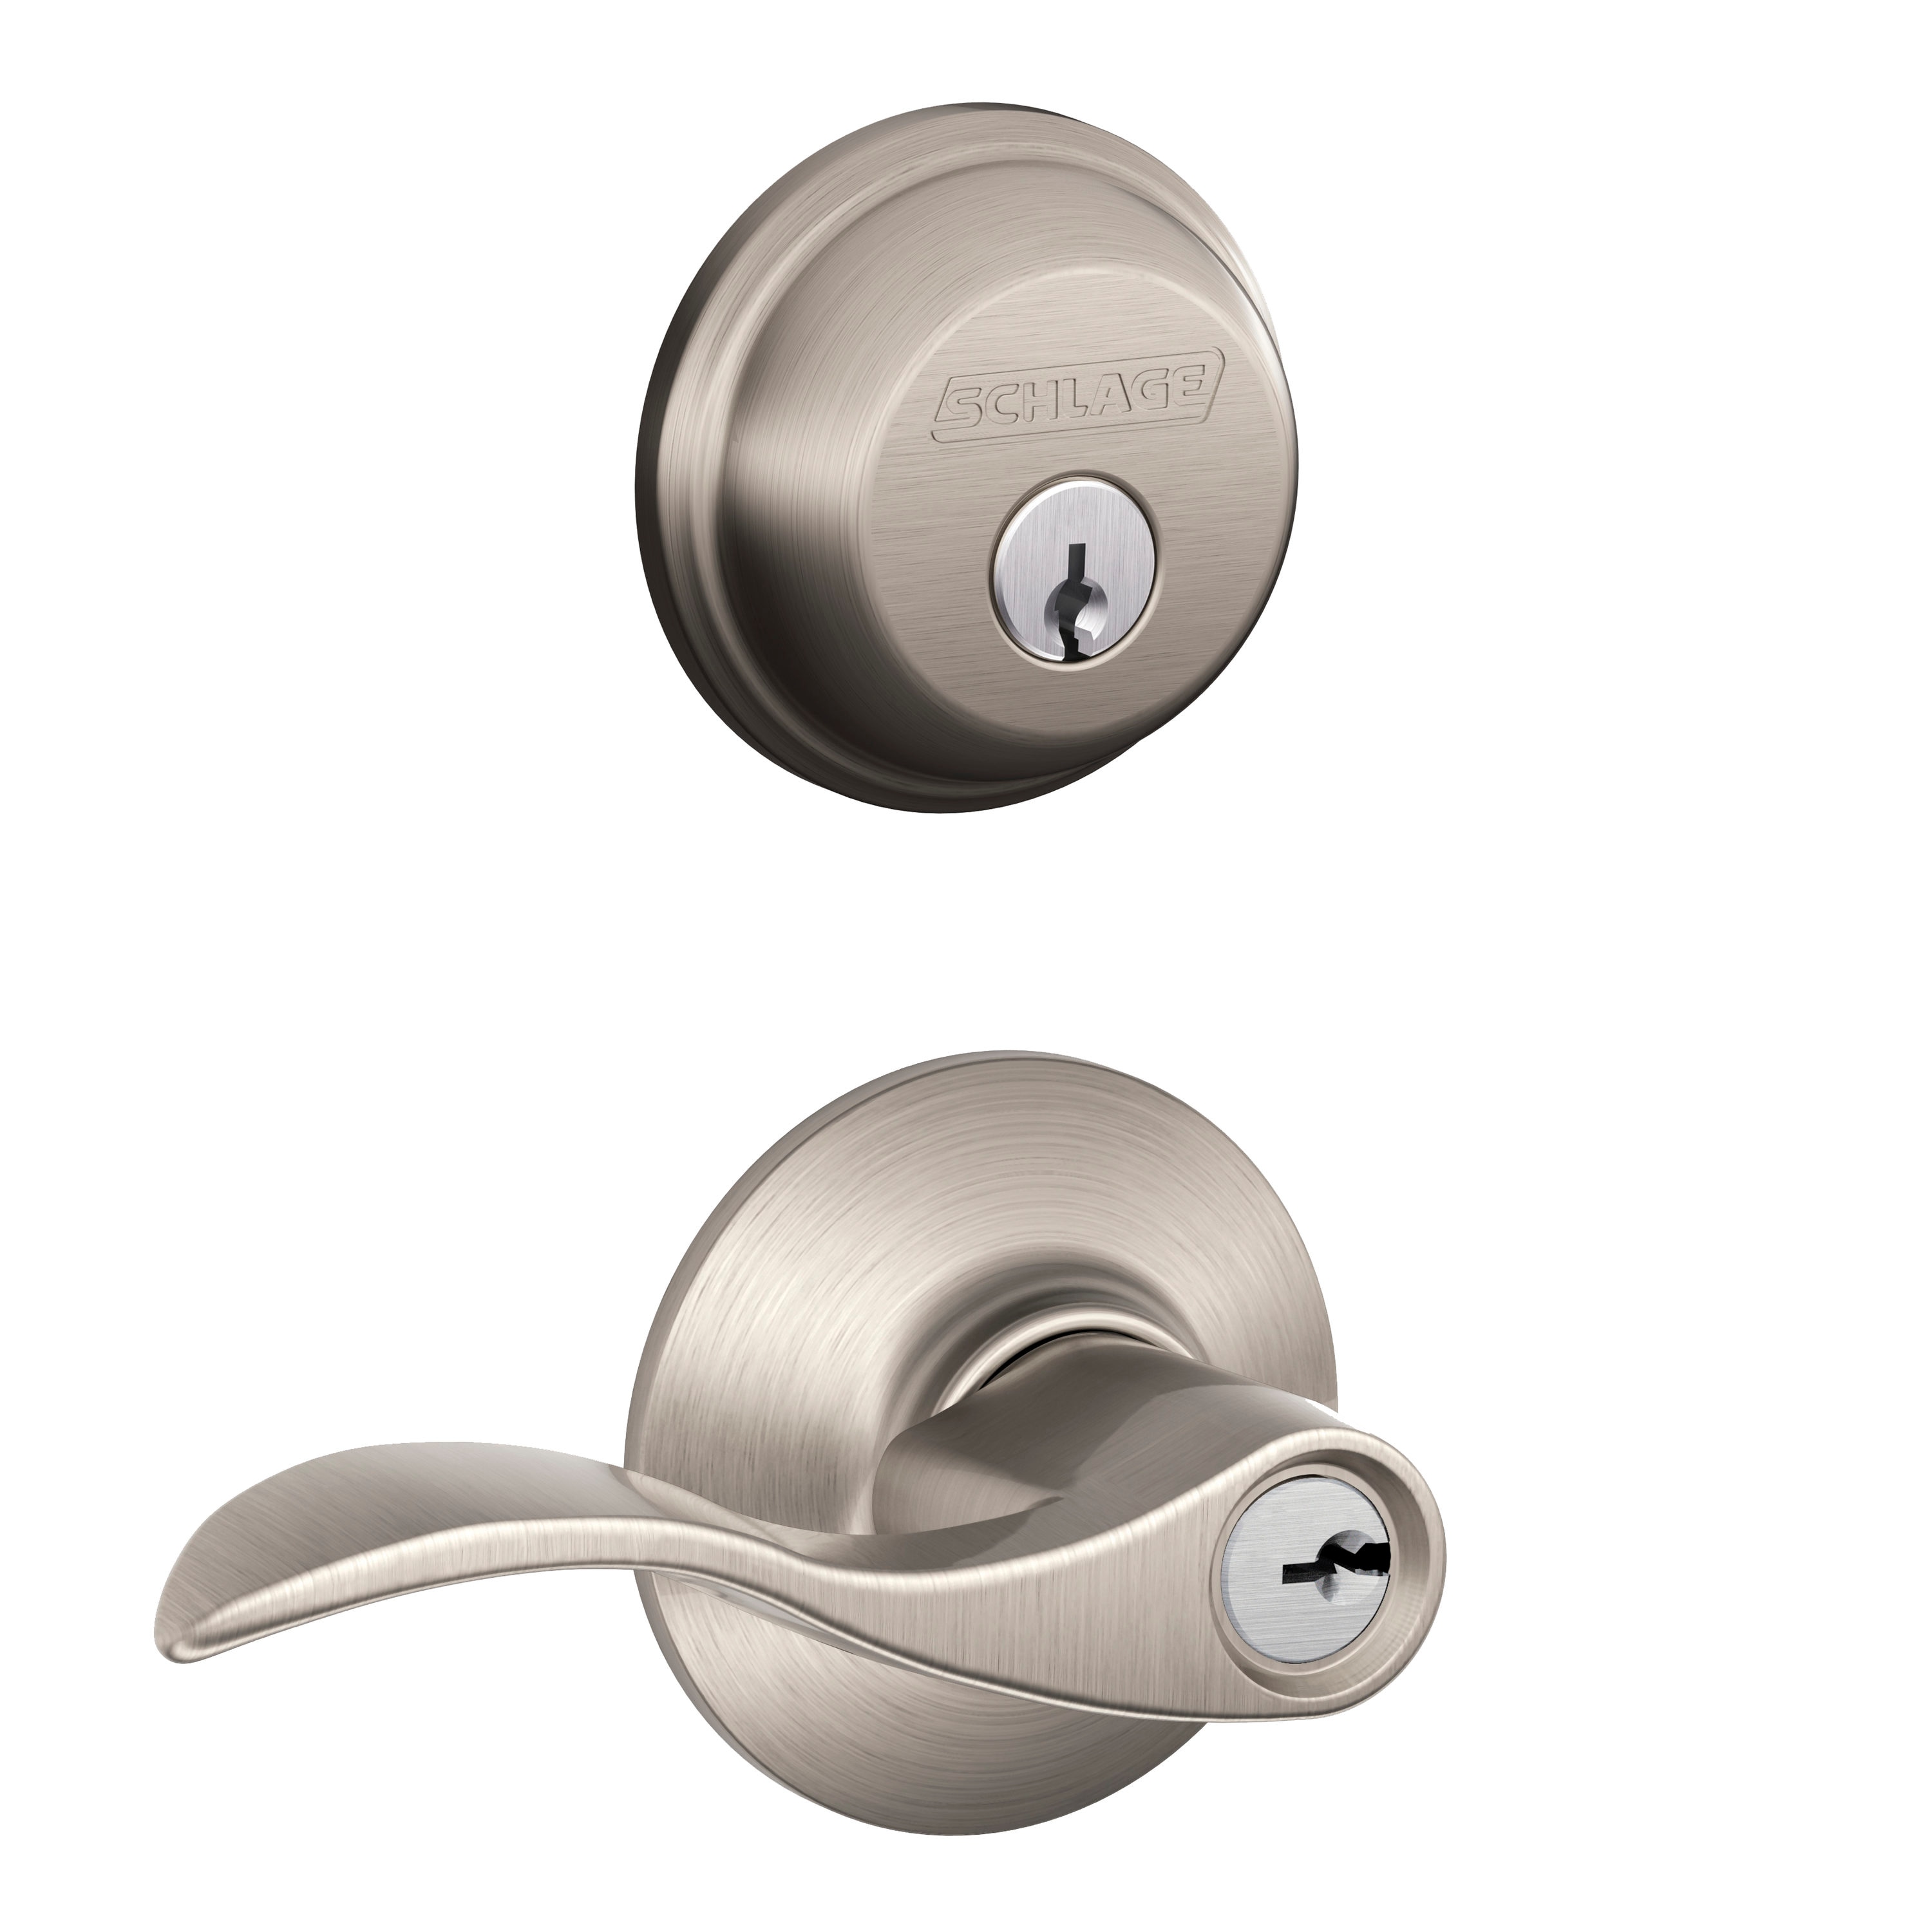 Shop Schlage Accent Satin Nickel Collection at